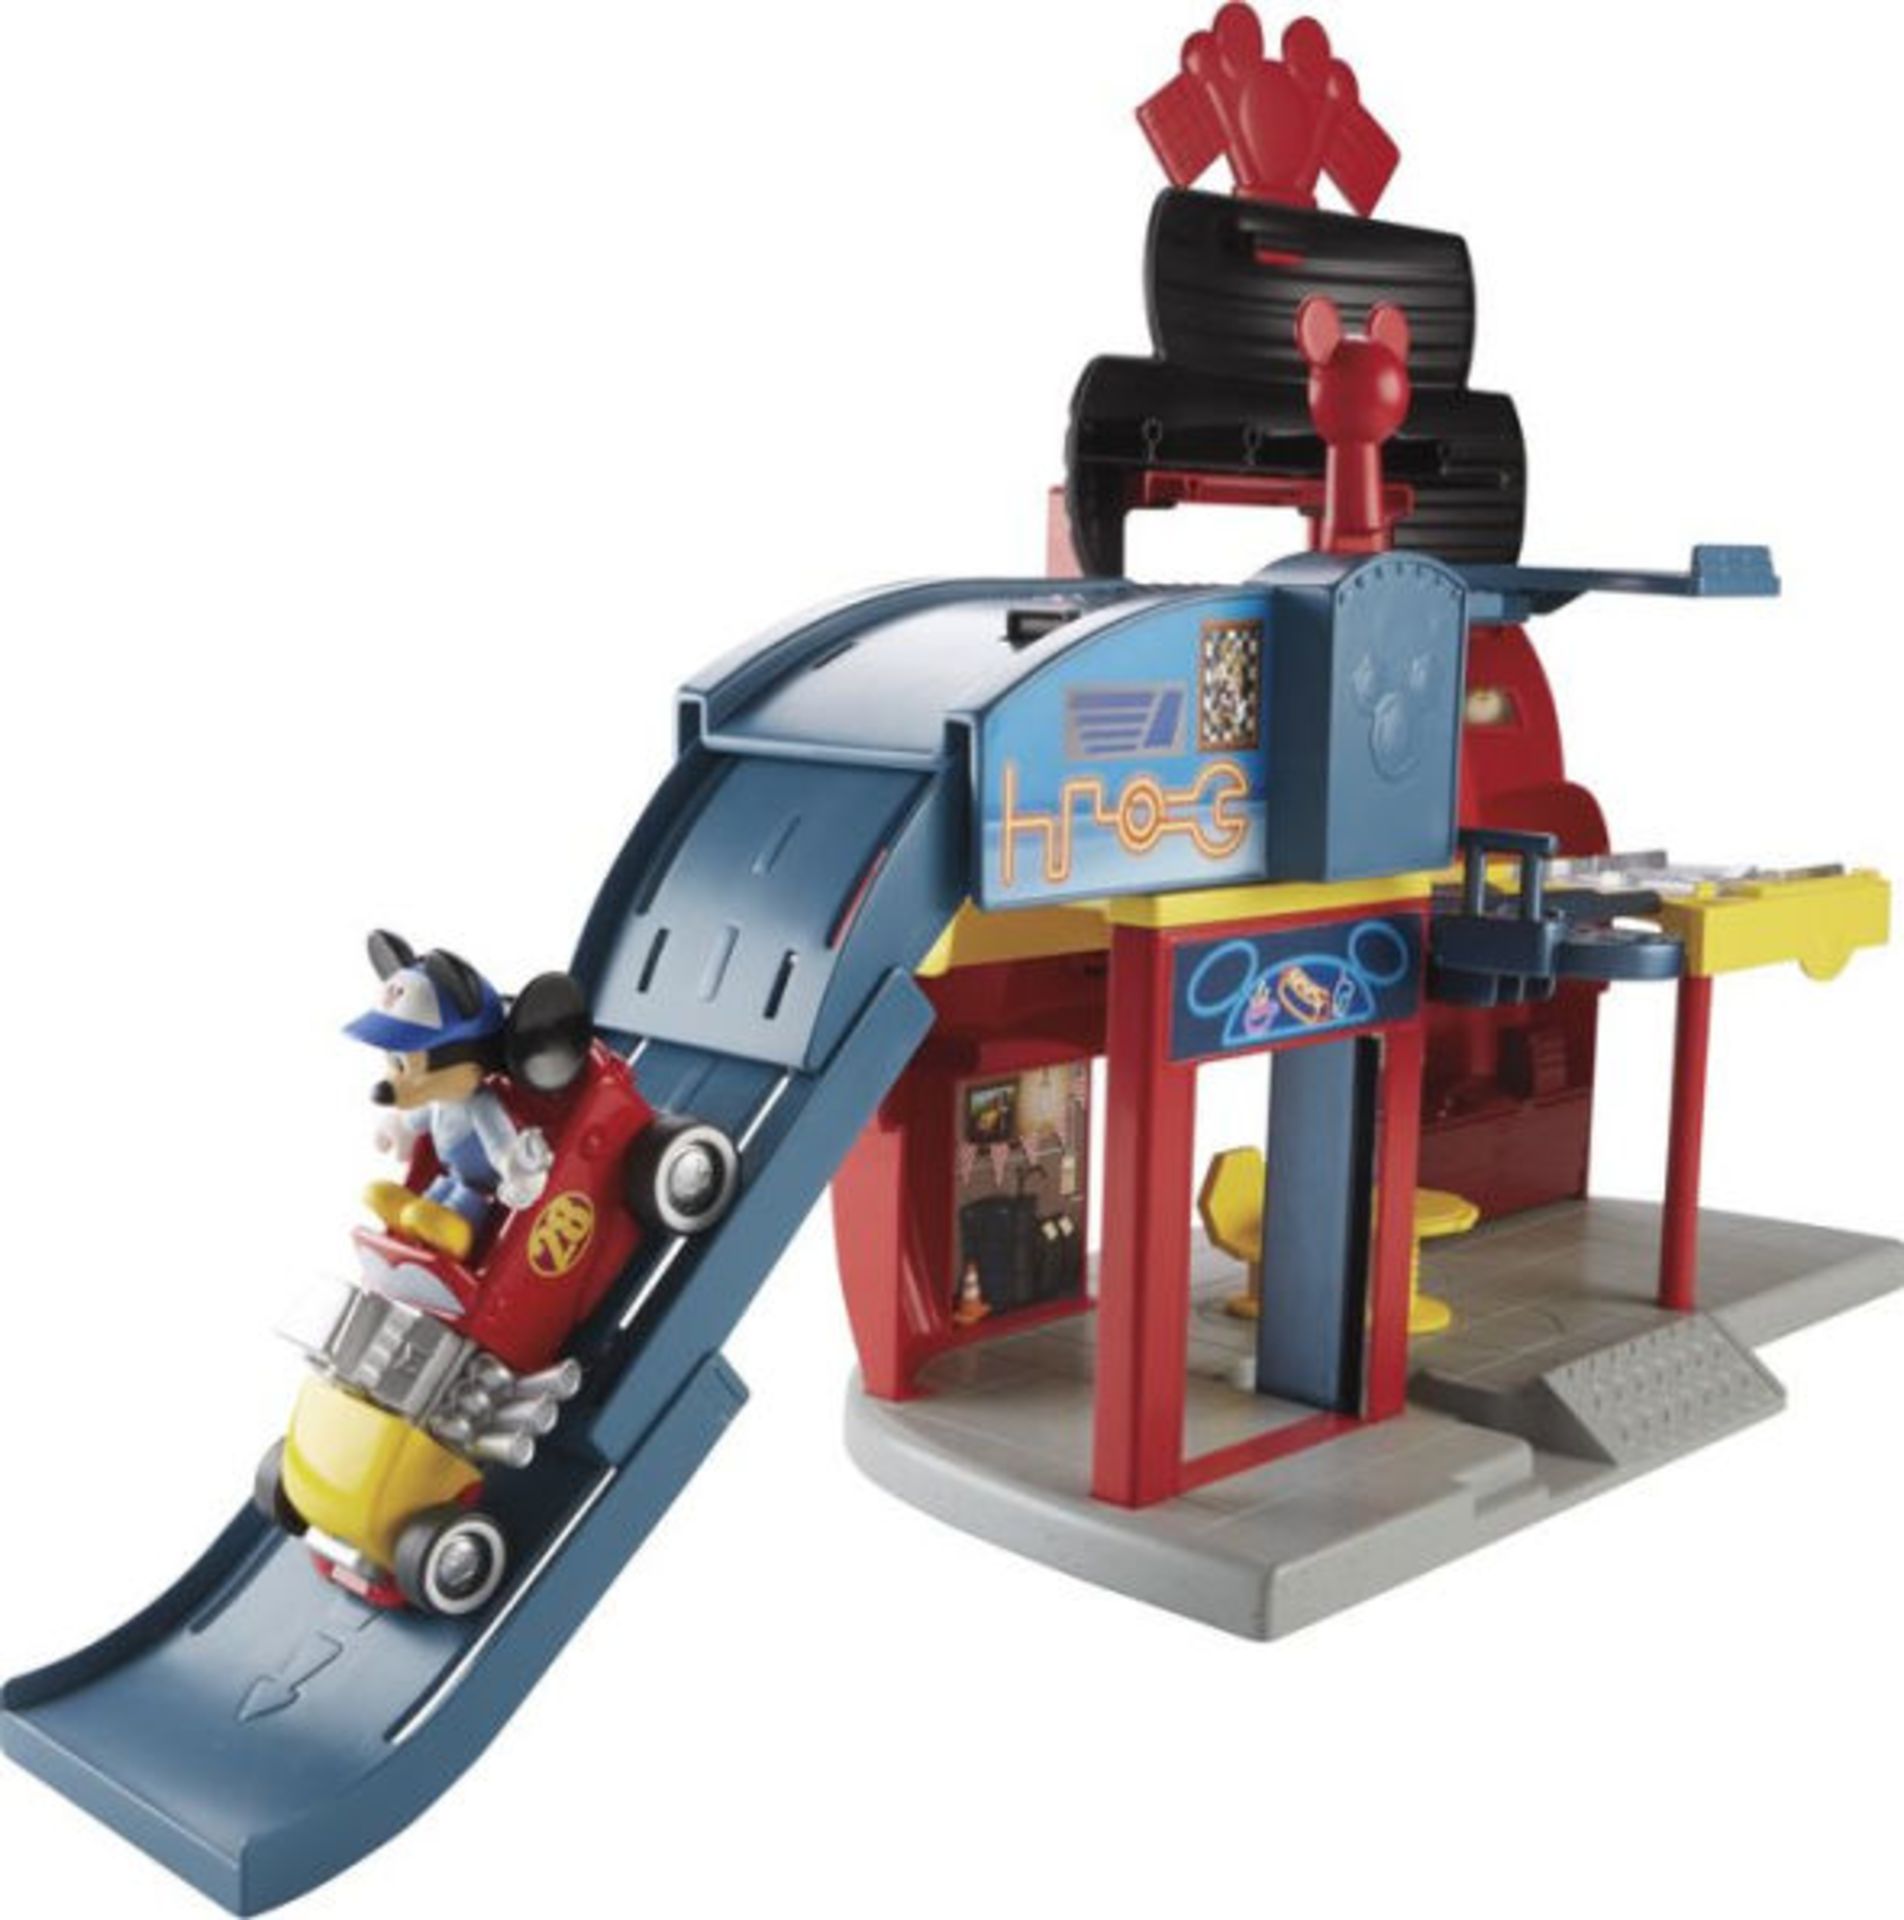 + VAT Brand New Disney Mickey and the Roadster Racers Garage - 3 Levels of Play - Rotating Car Lift - Image 2 of 2